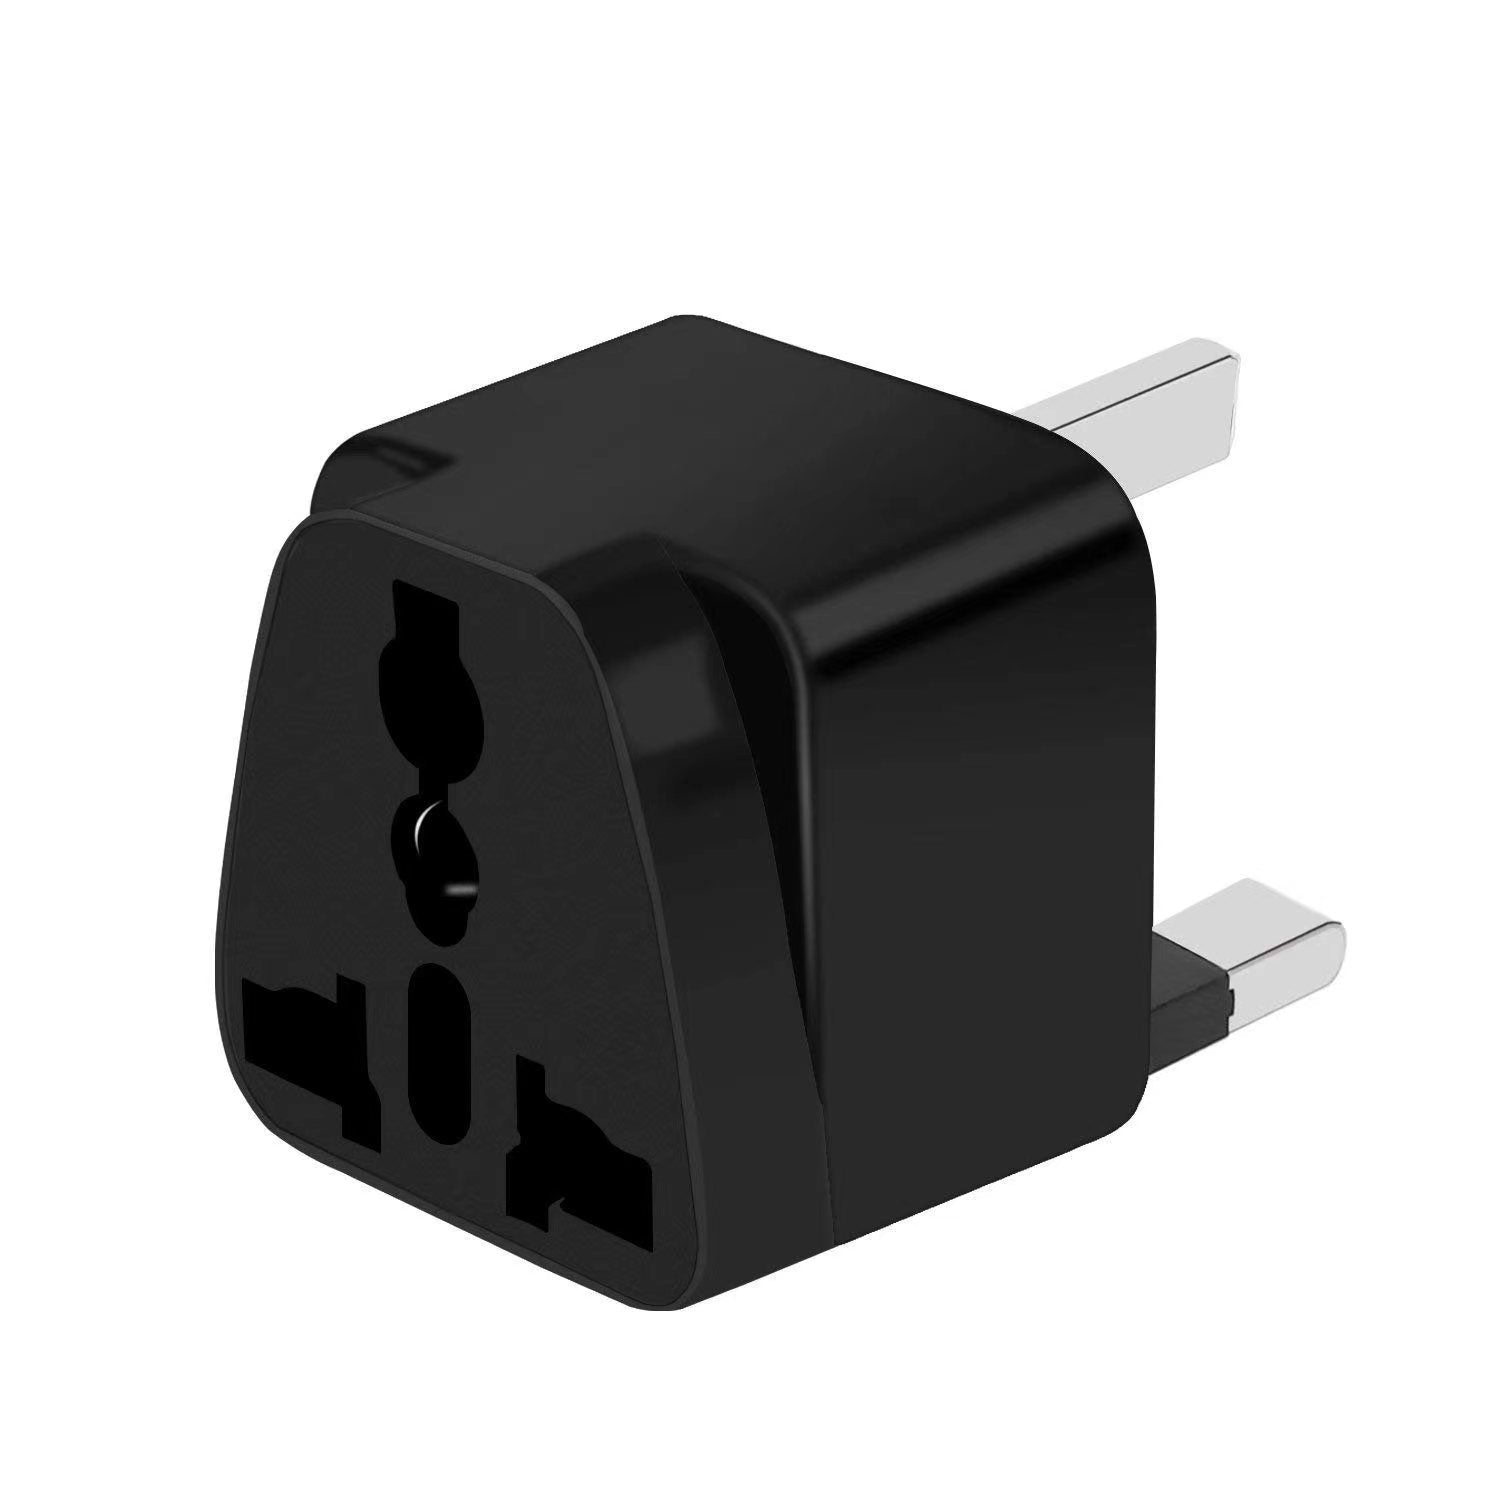 US to EU/UK/AU Charger Switch Adapter for Travel - AOHi